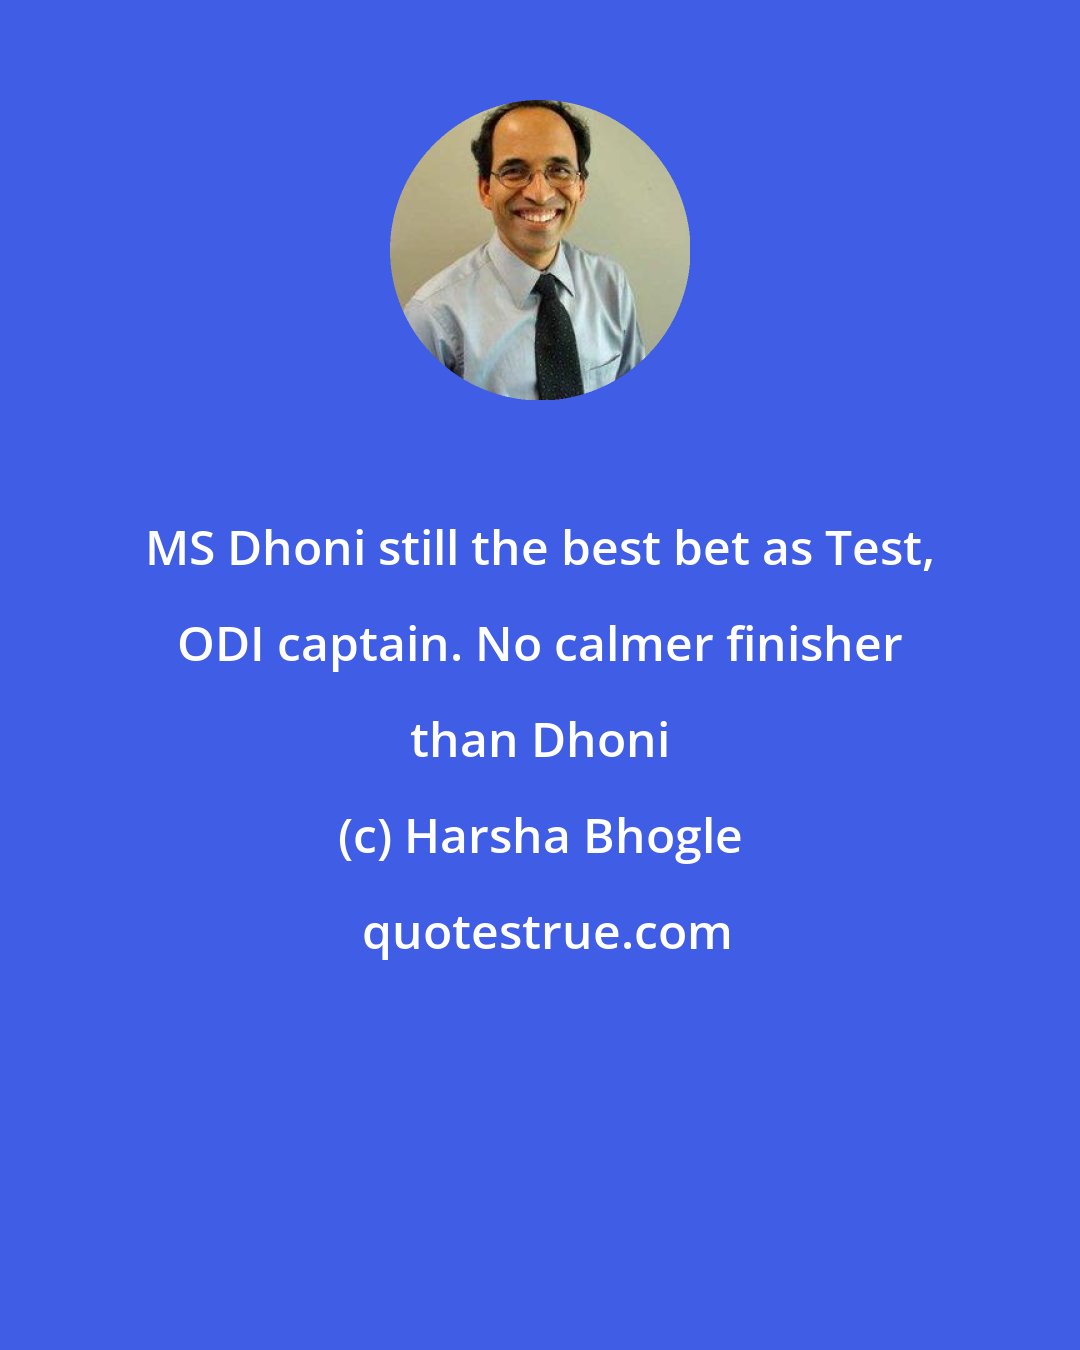 Harsha Bhogle: MS Dhoni still the best bet as Test, ODI captain. No calmer finisher than Dhoni